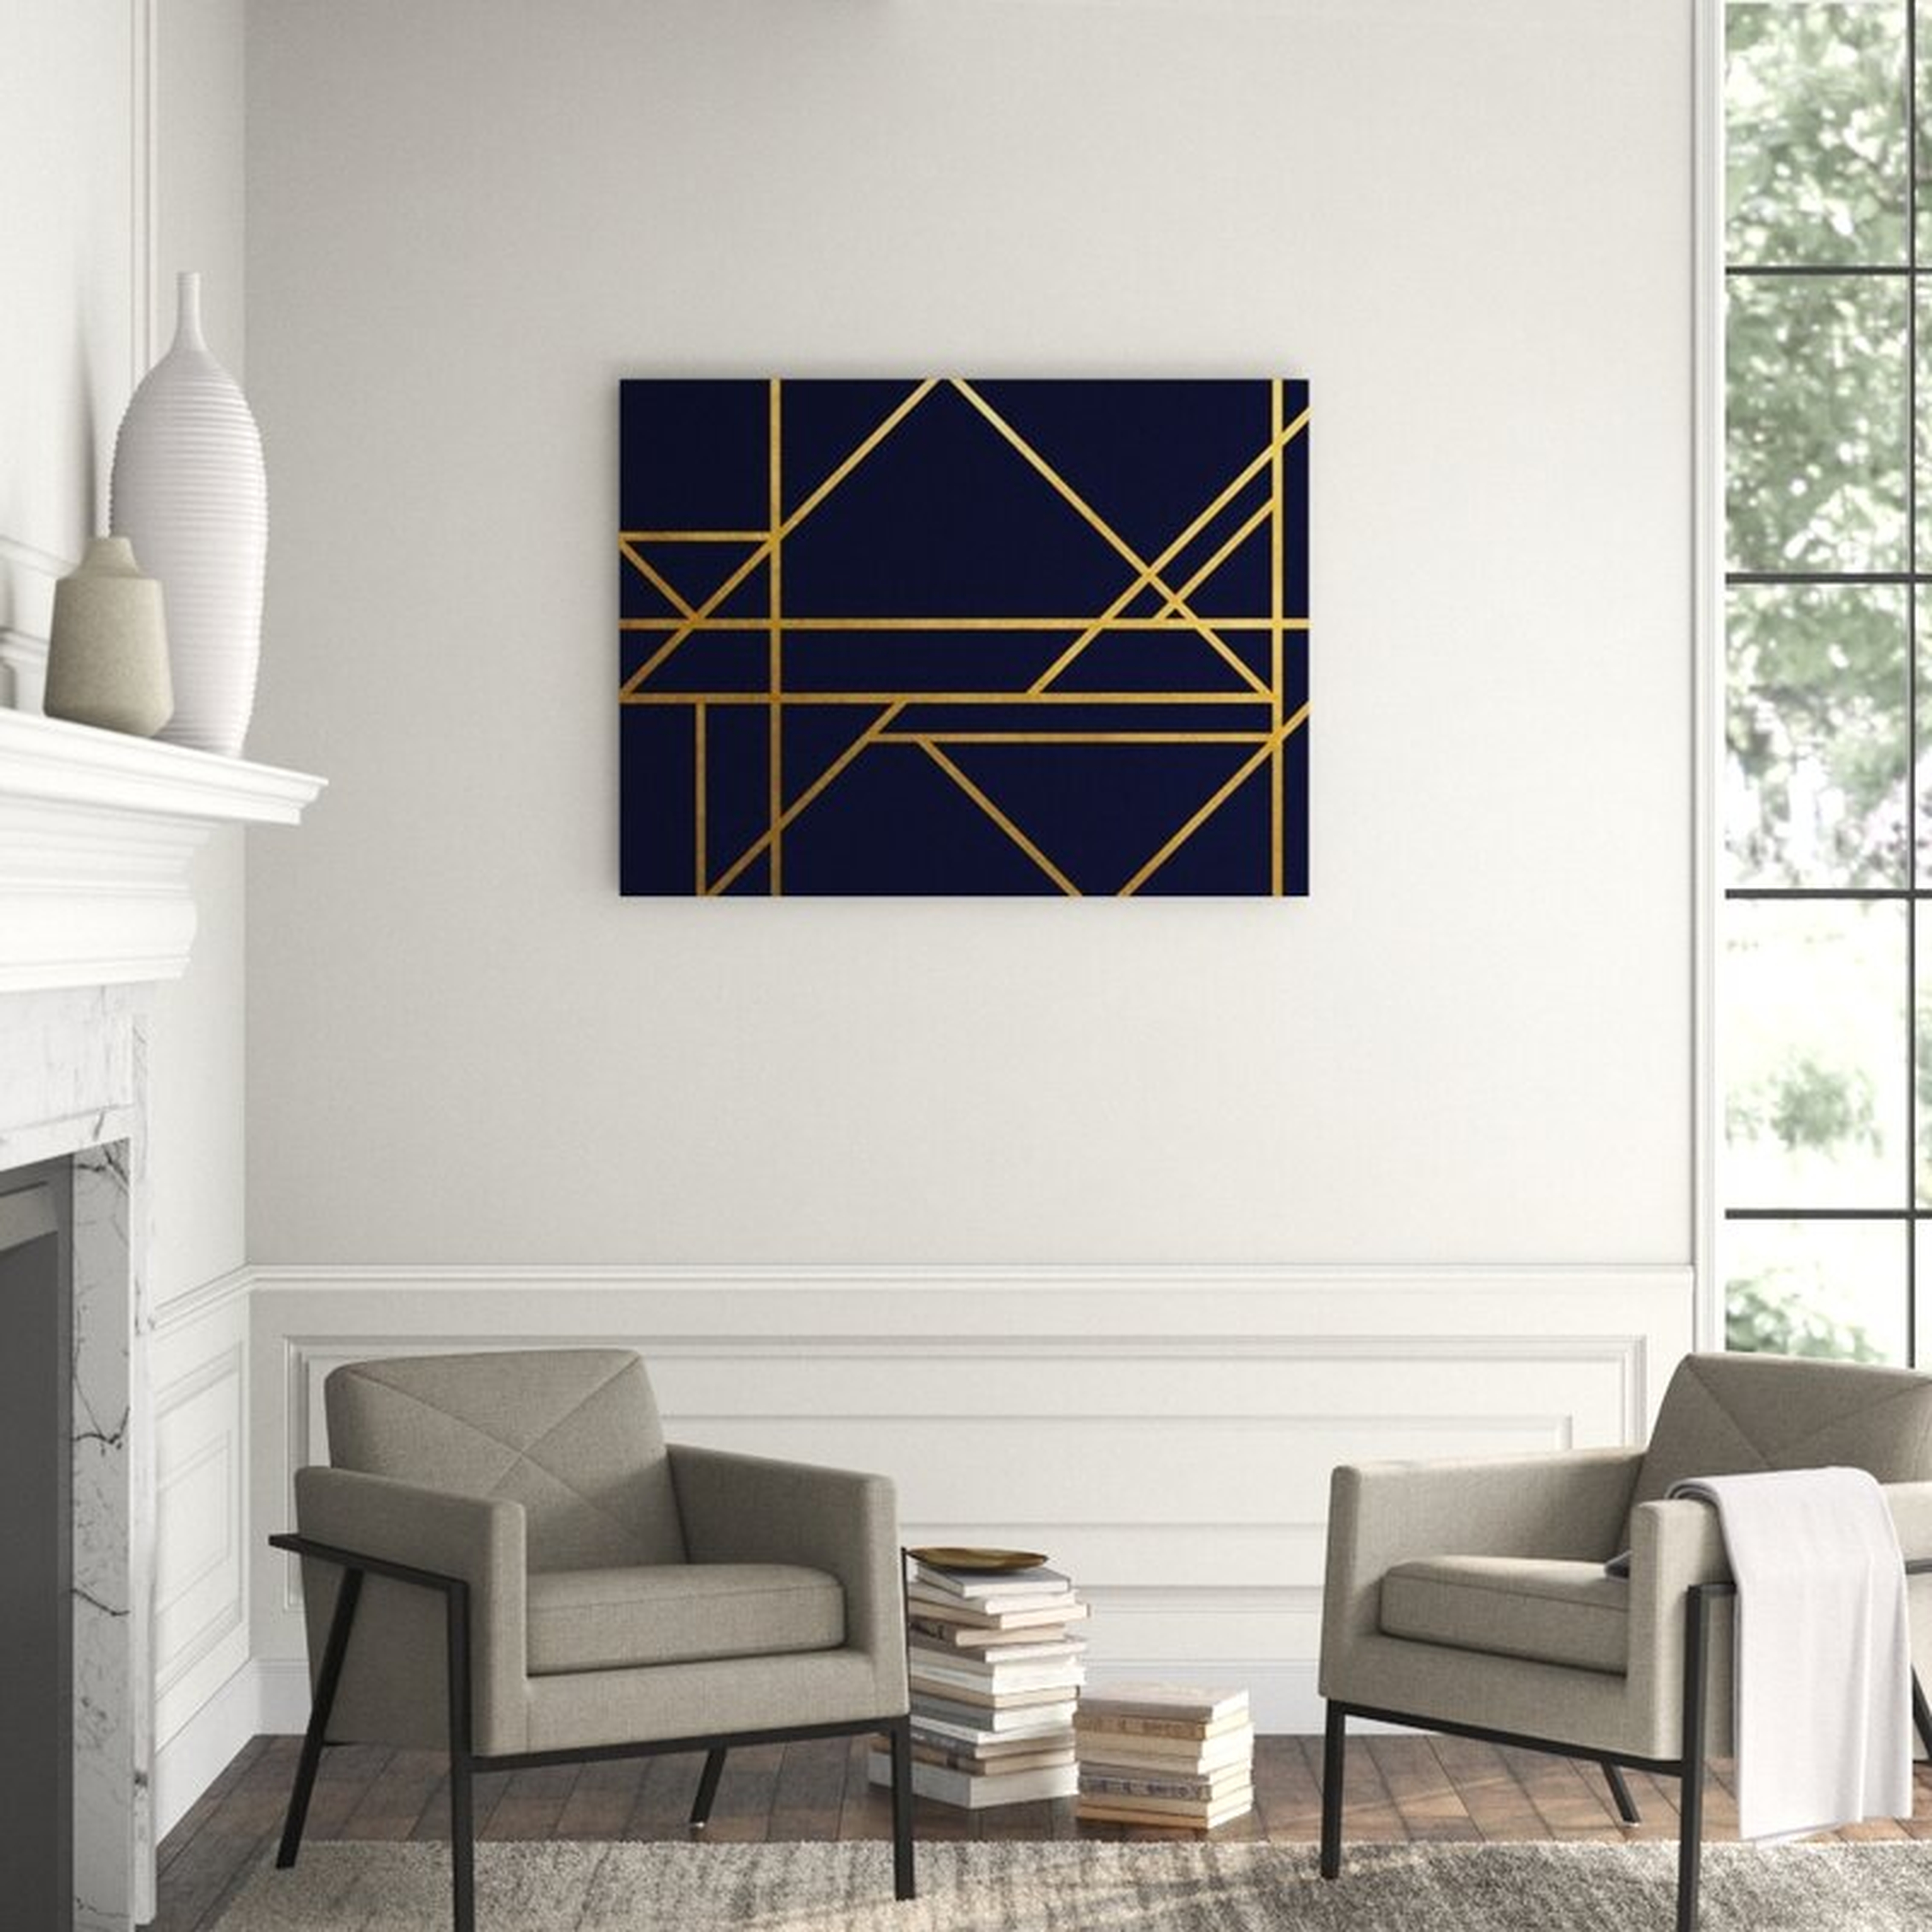 Chelsea Art Studio Gold Navy and Lines I by Guseul Park - Graphic Art - Perigold